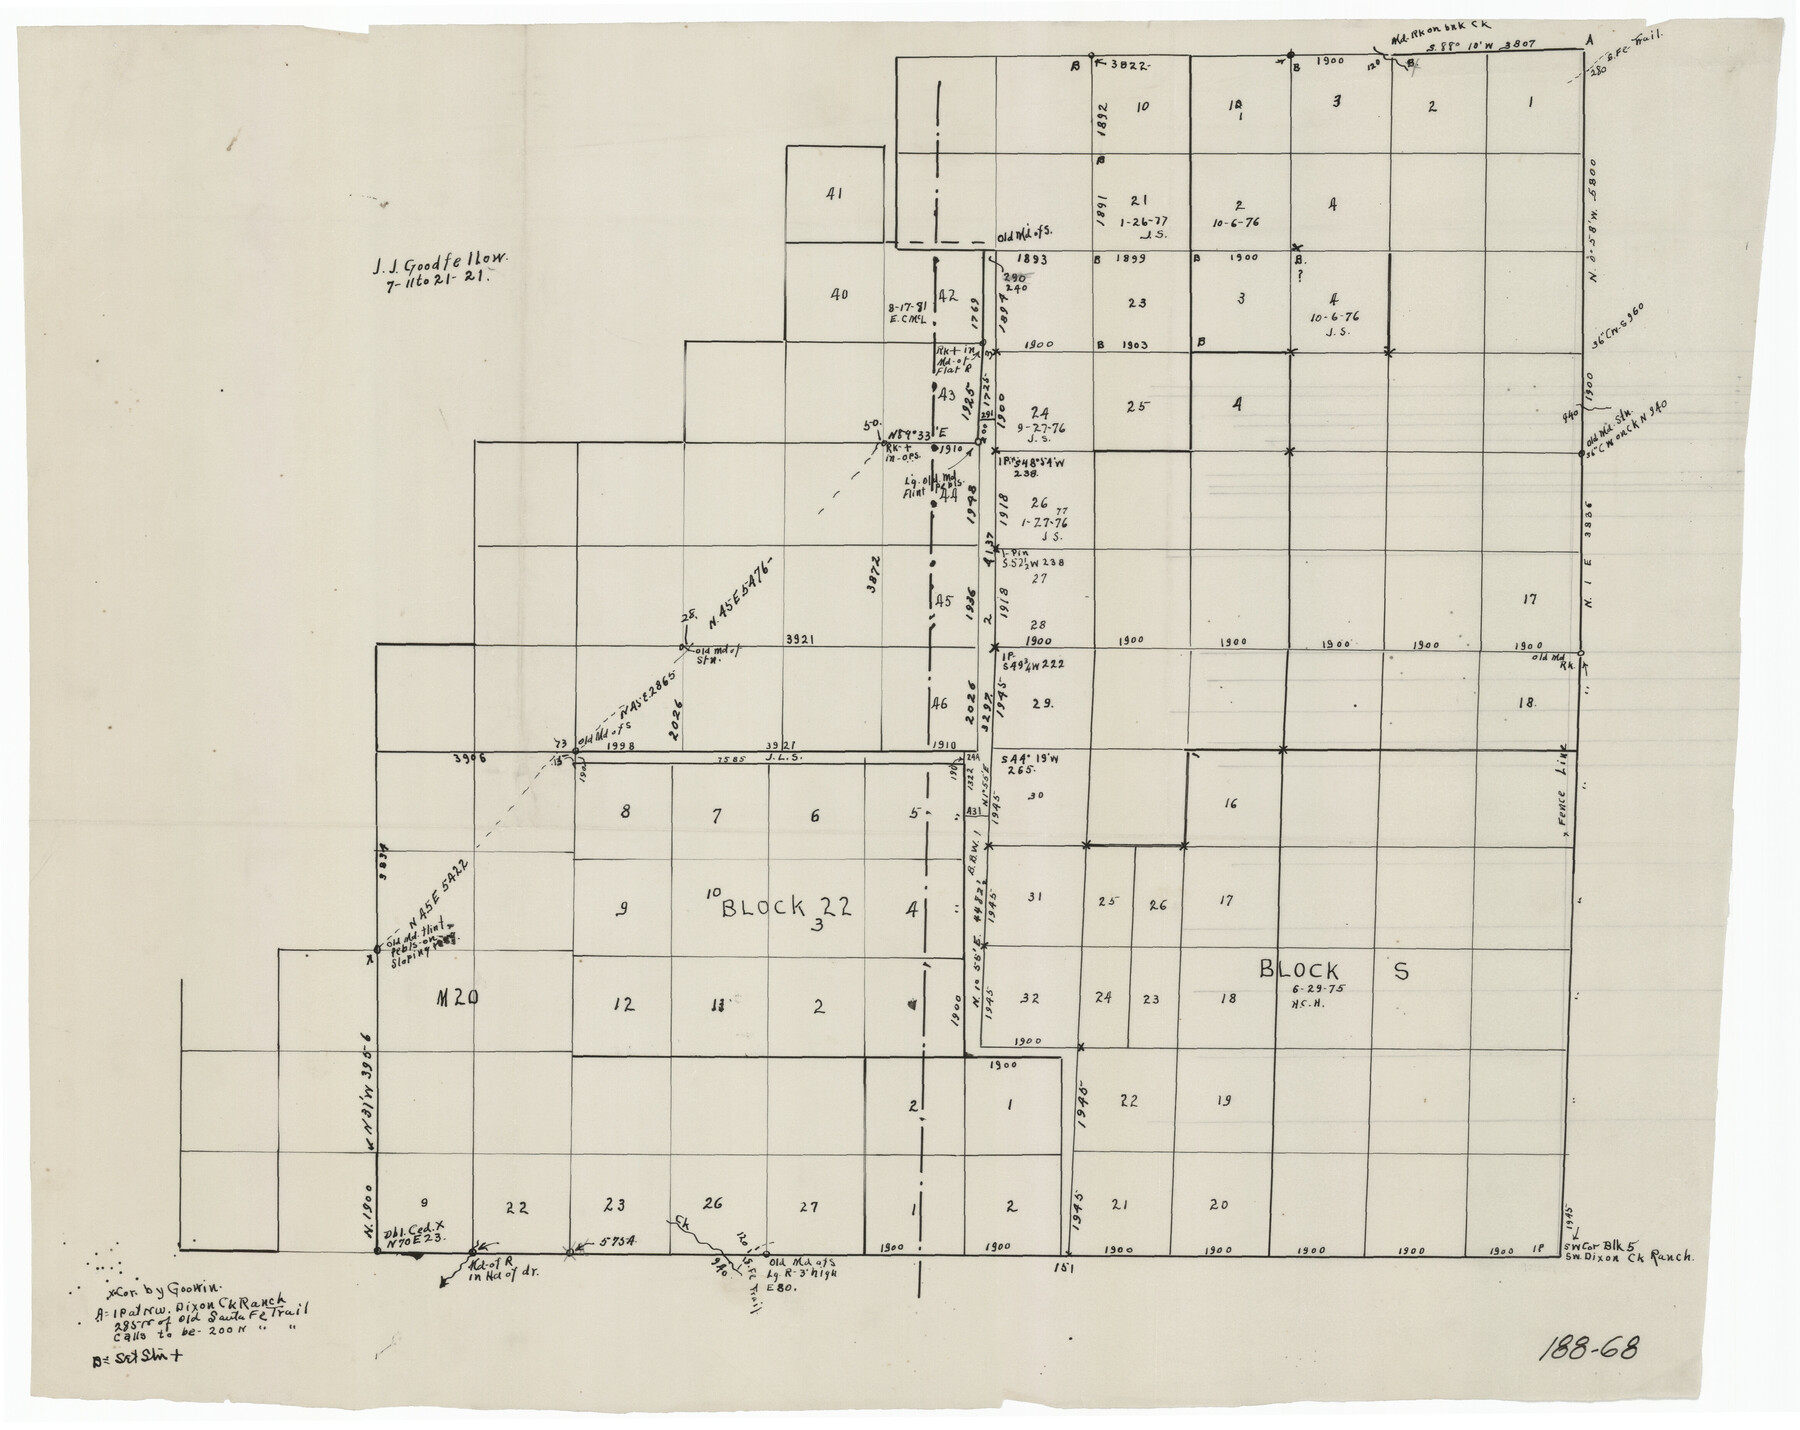 91825, [Parts of Blocks M-20, 22 and S], Twichell Survey Records